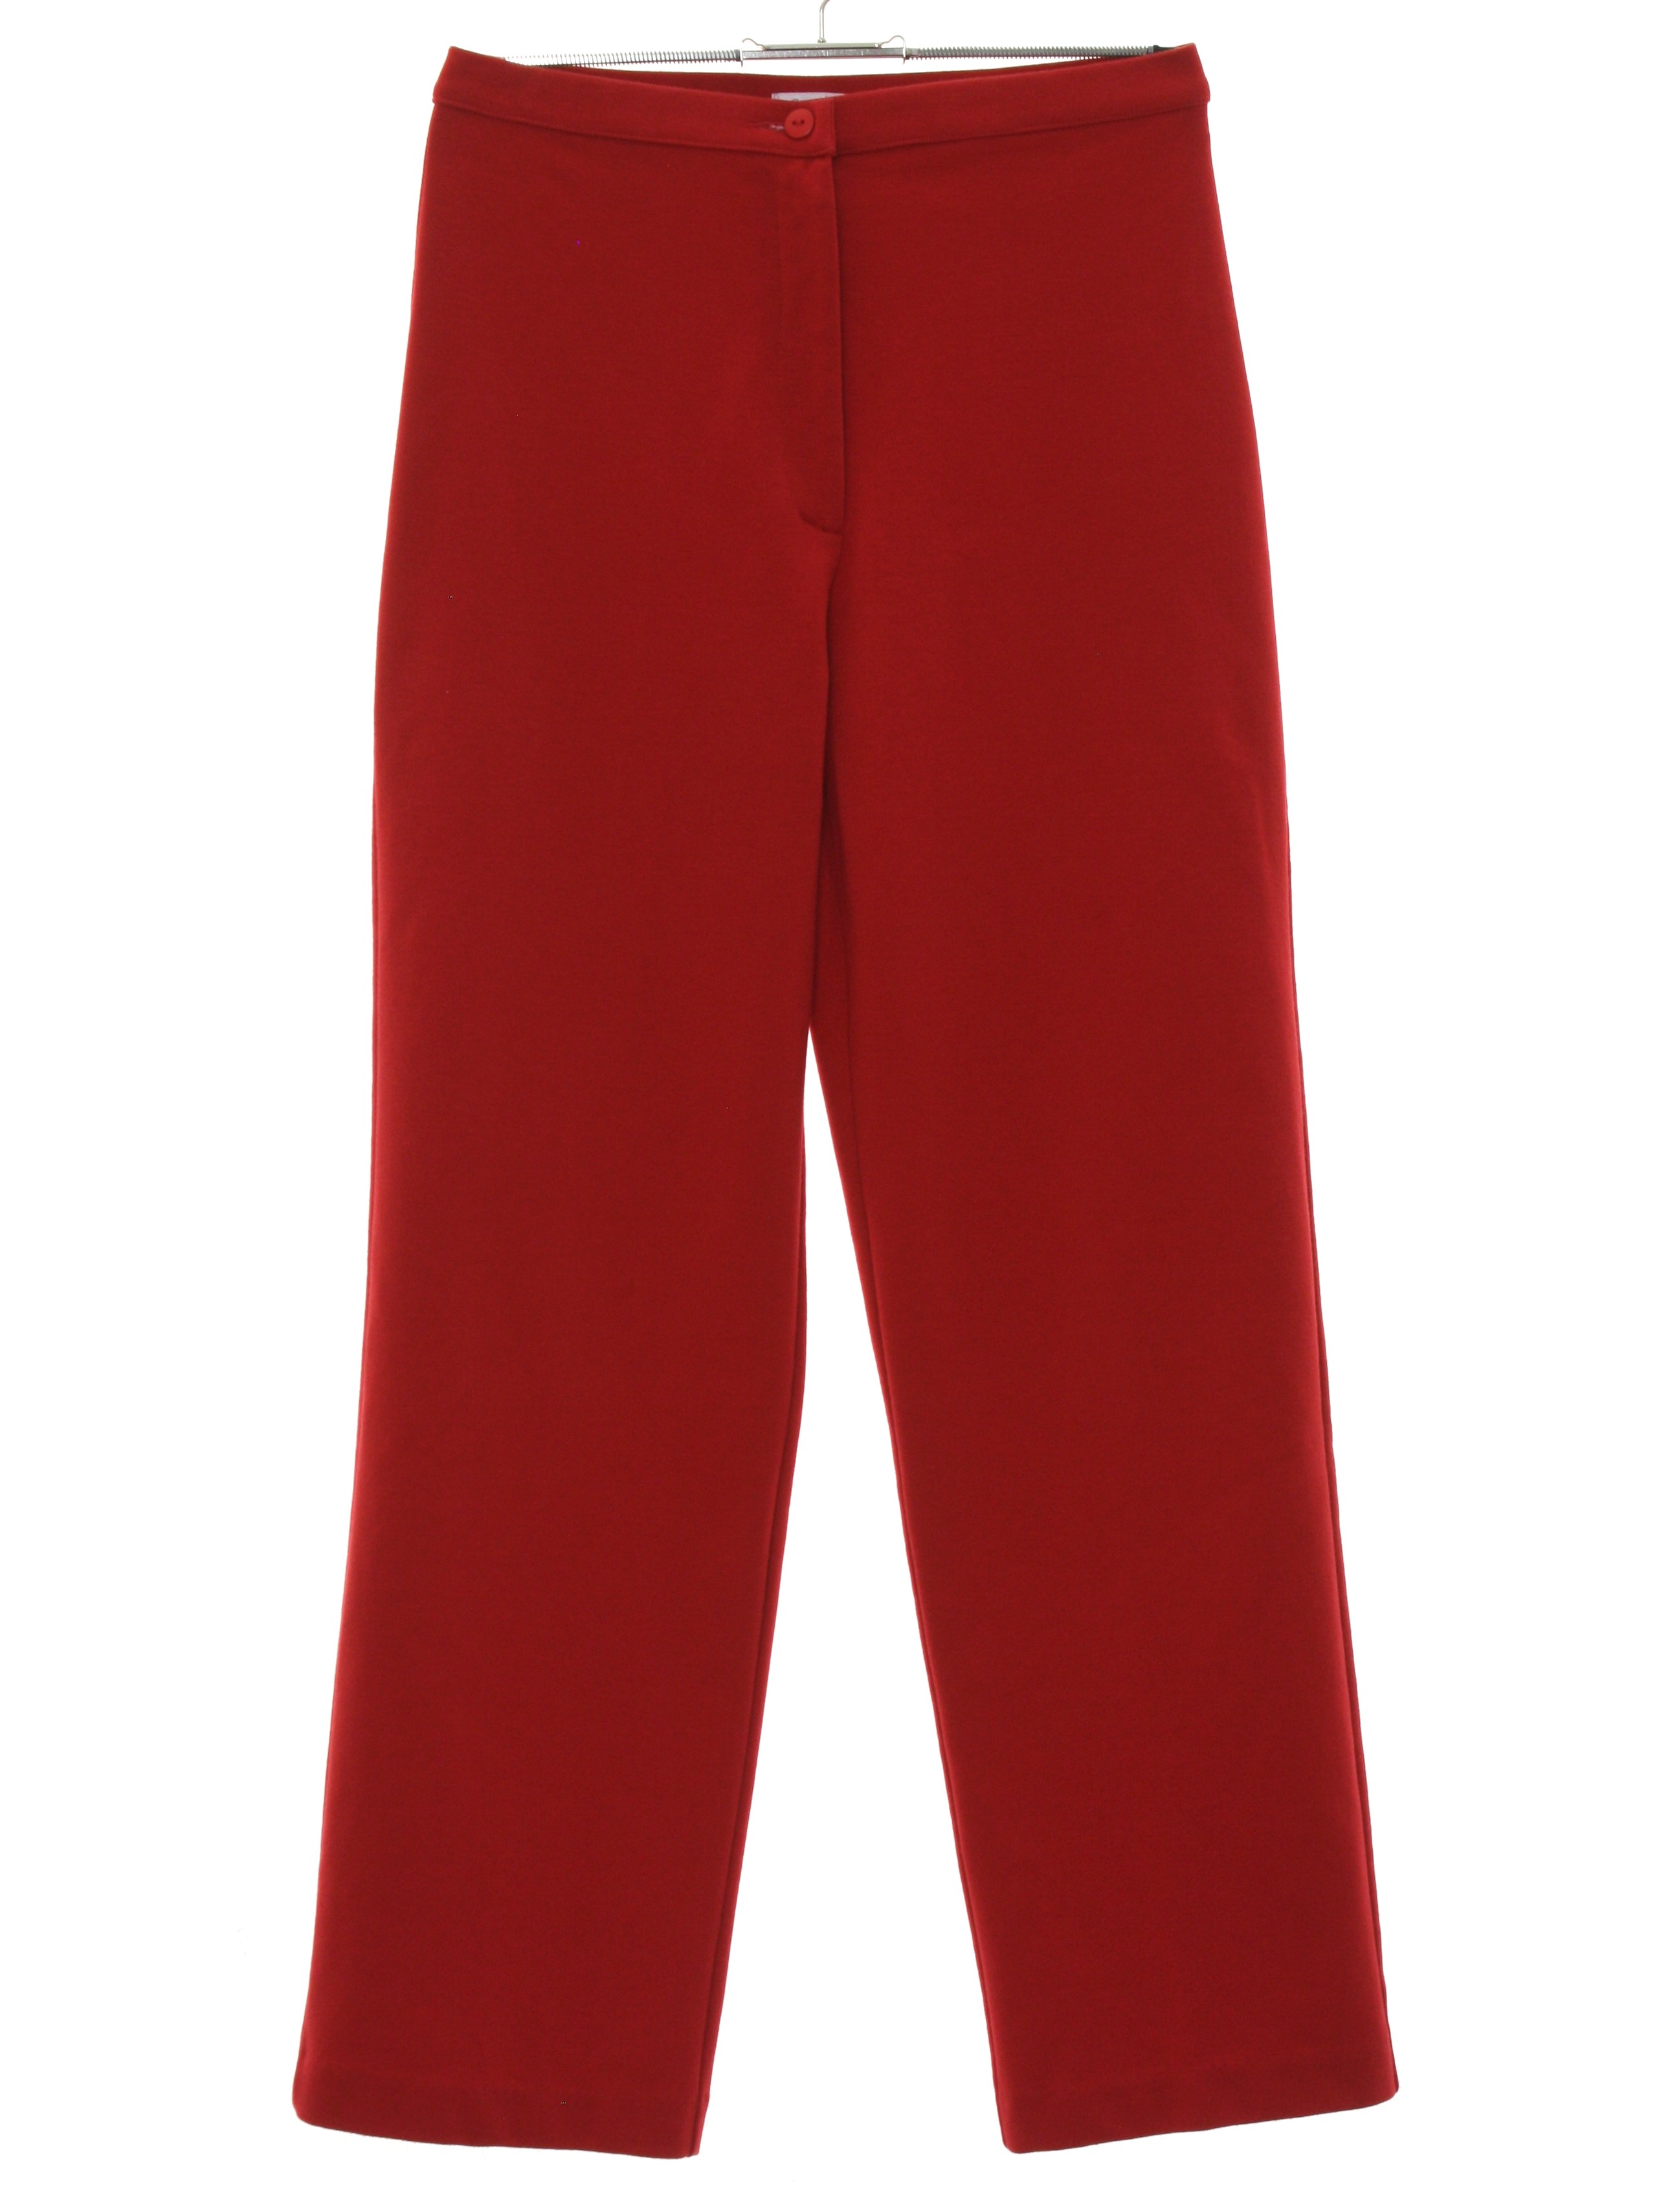 Pants: 90s -Drapers and Damons- Womens red solid colored, stretchy ...